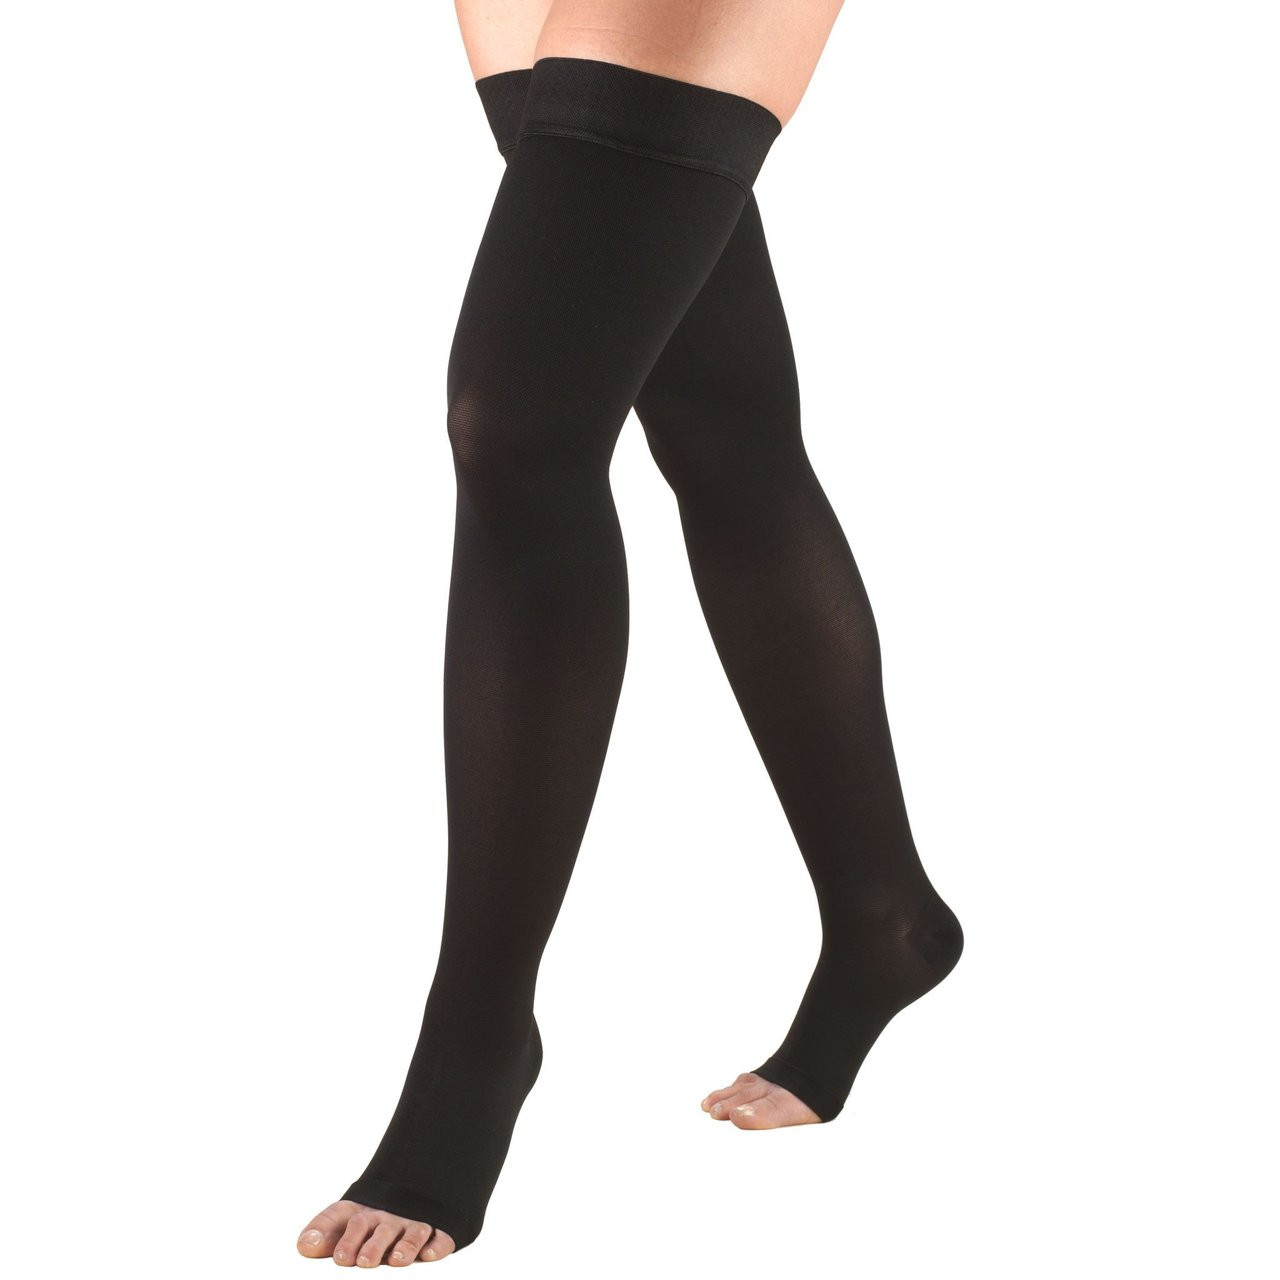 TRUFORM 0868BL-XL Compression 20-30 mmHg Thigh-high, Open-toe, Stay-up Beaded top, black, X-Large